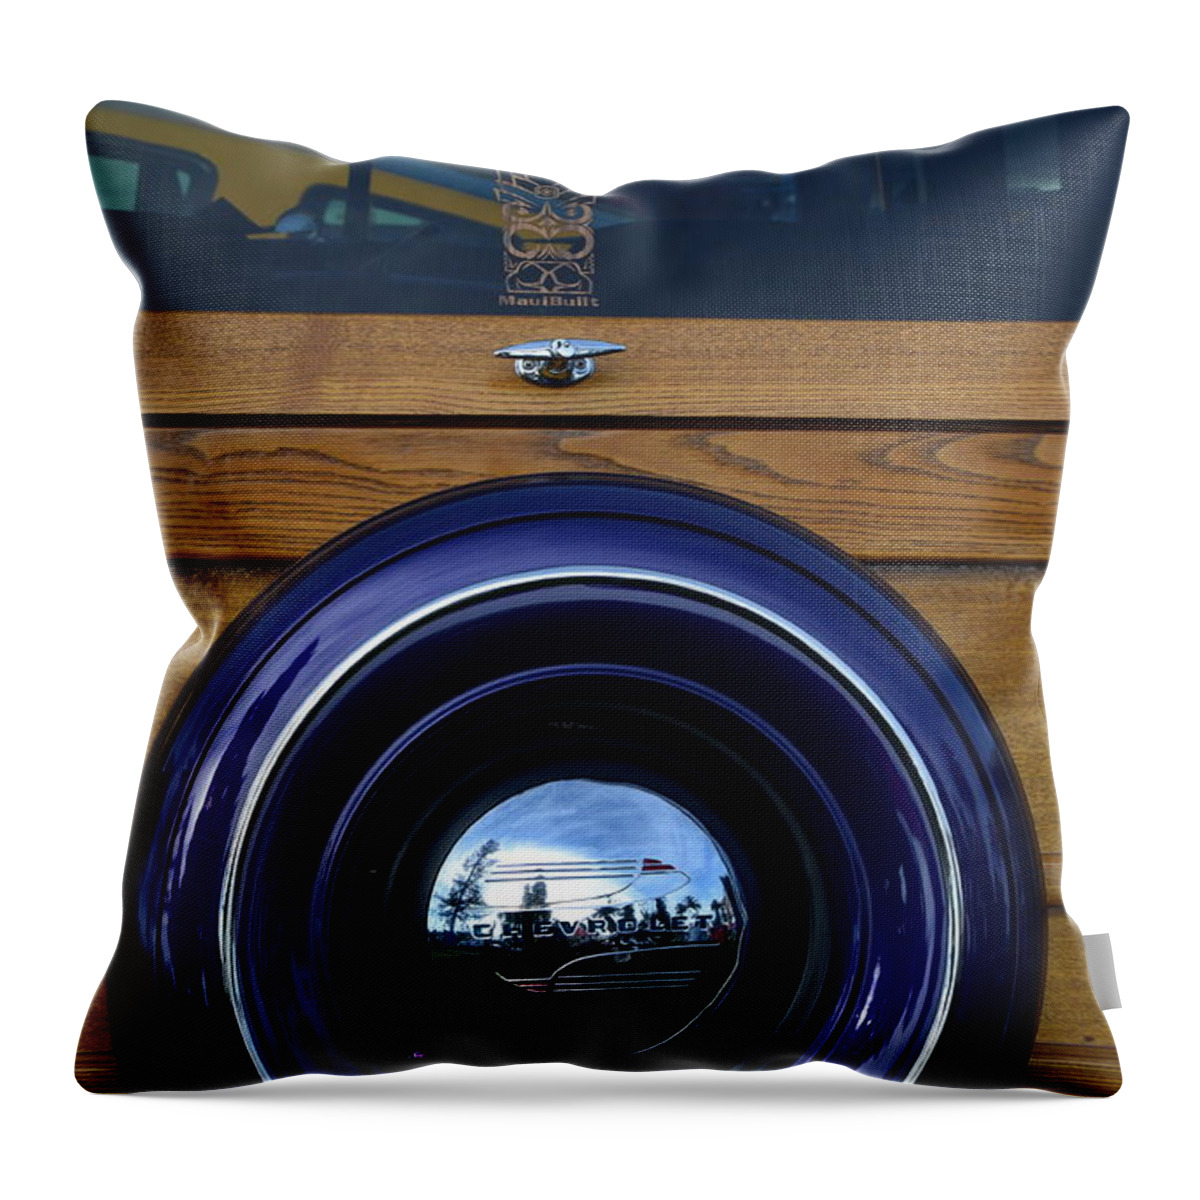  Throw Pillow featuring the photograph Woodie by Dean Ferreira